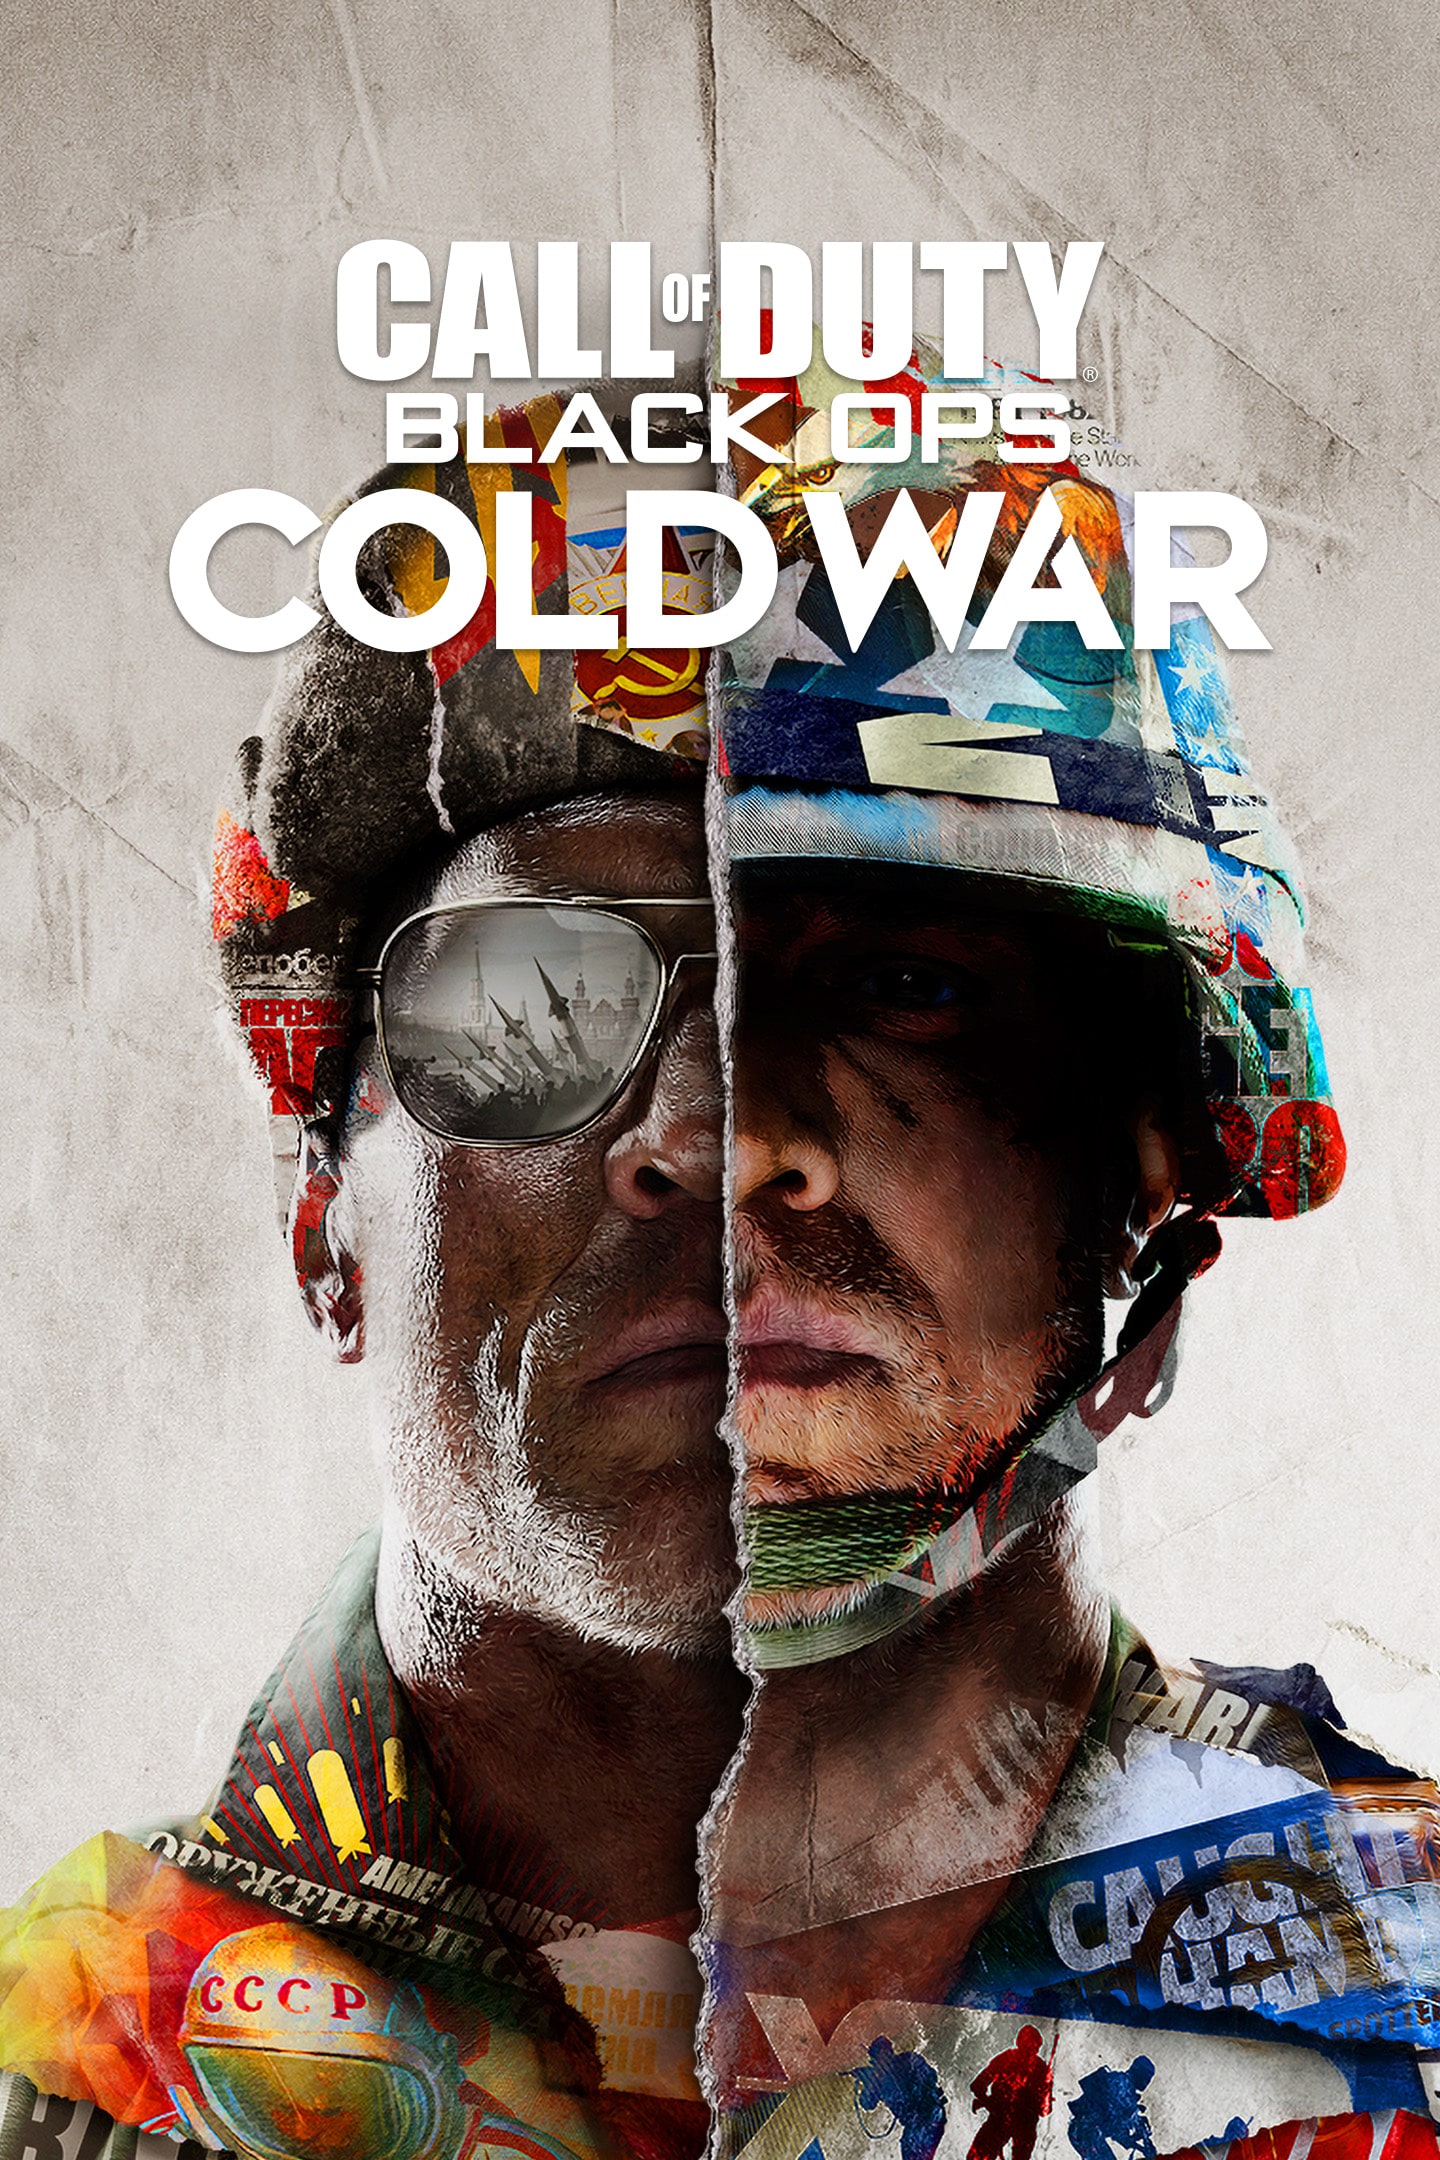 Call Of Duty: Black Ops - Cold War (PlayStation 5) · Super Dicas e